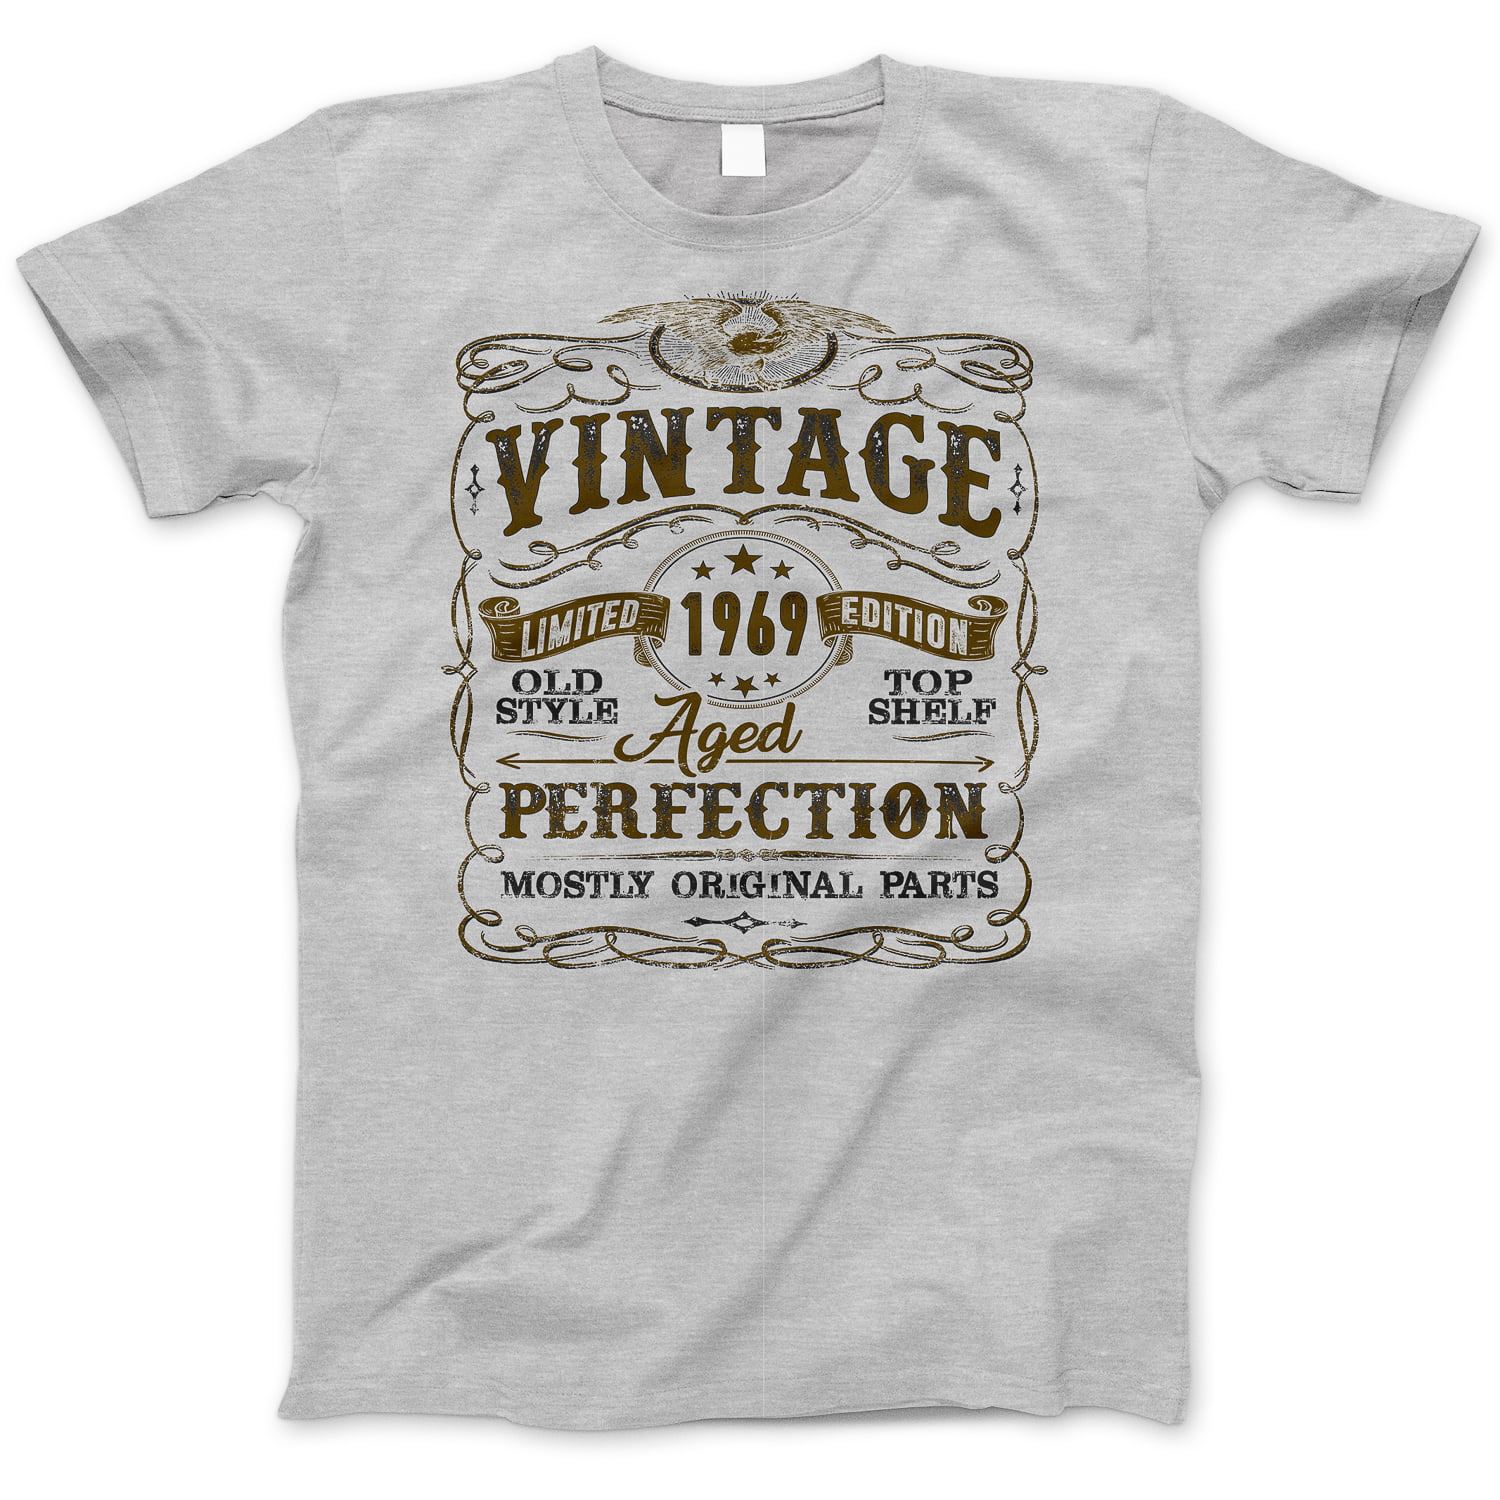 Birthday T-shirt MADE IN 1969 Aged To Perfection Party Gift Choose colour/Size